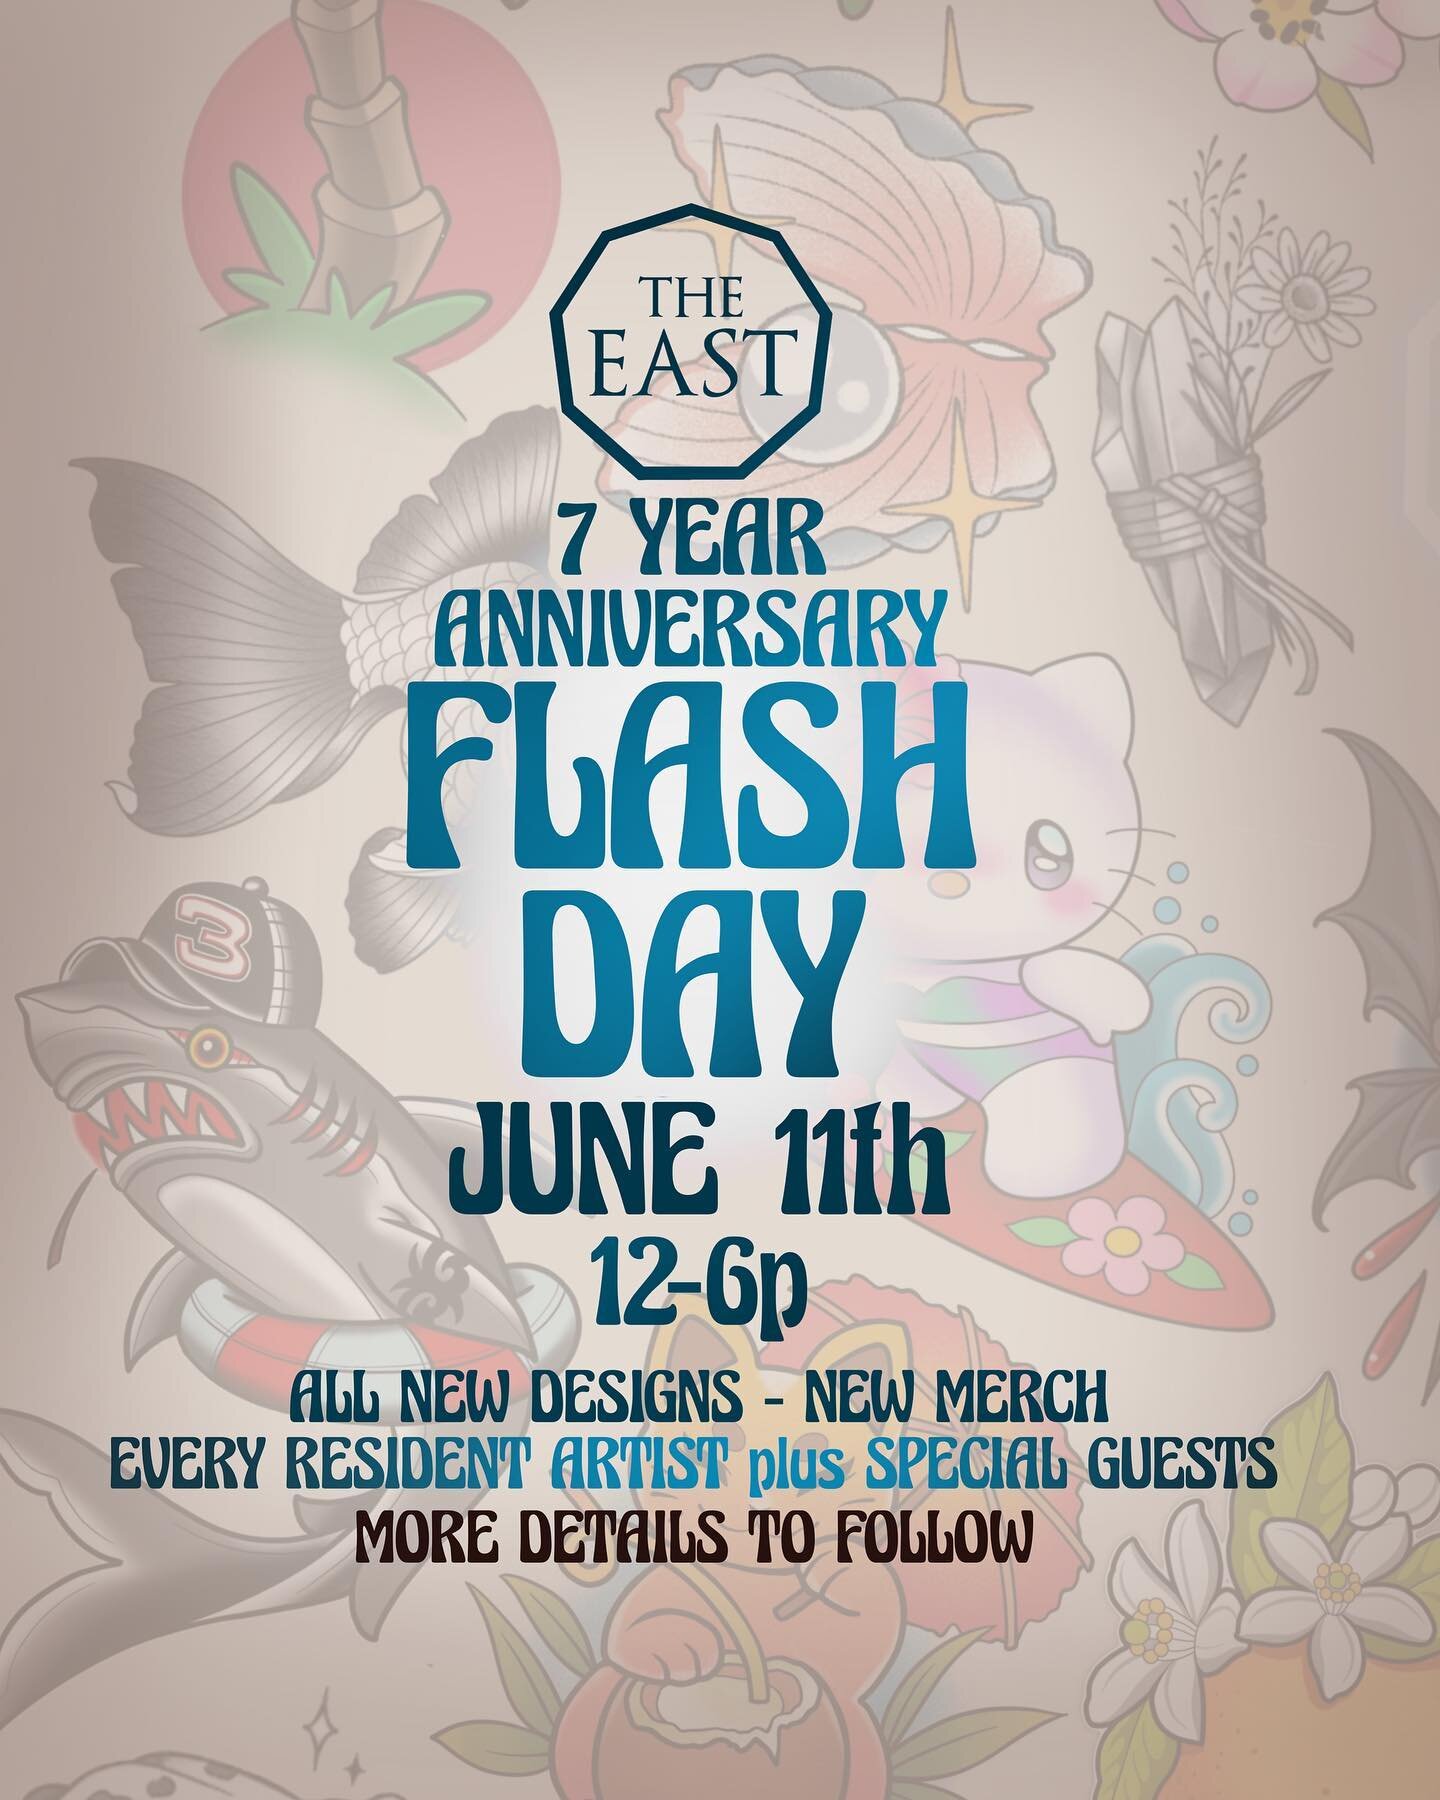 We&rsquo;d like to welcome you to our 7 Year Anniversary Flash Day! 

More than a dozen artists tattooing from a giant sheet of original ALL NEW flash designs. ✏️ 

ALL of our resident artists are participating, so this would be a great time to skip 